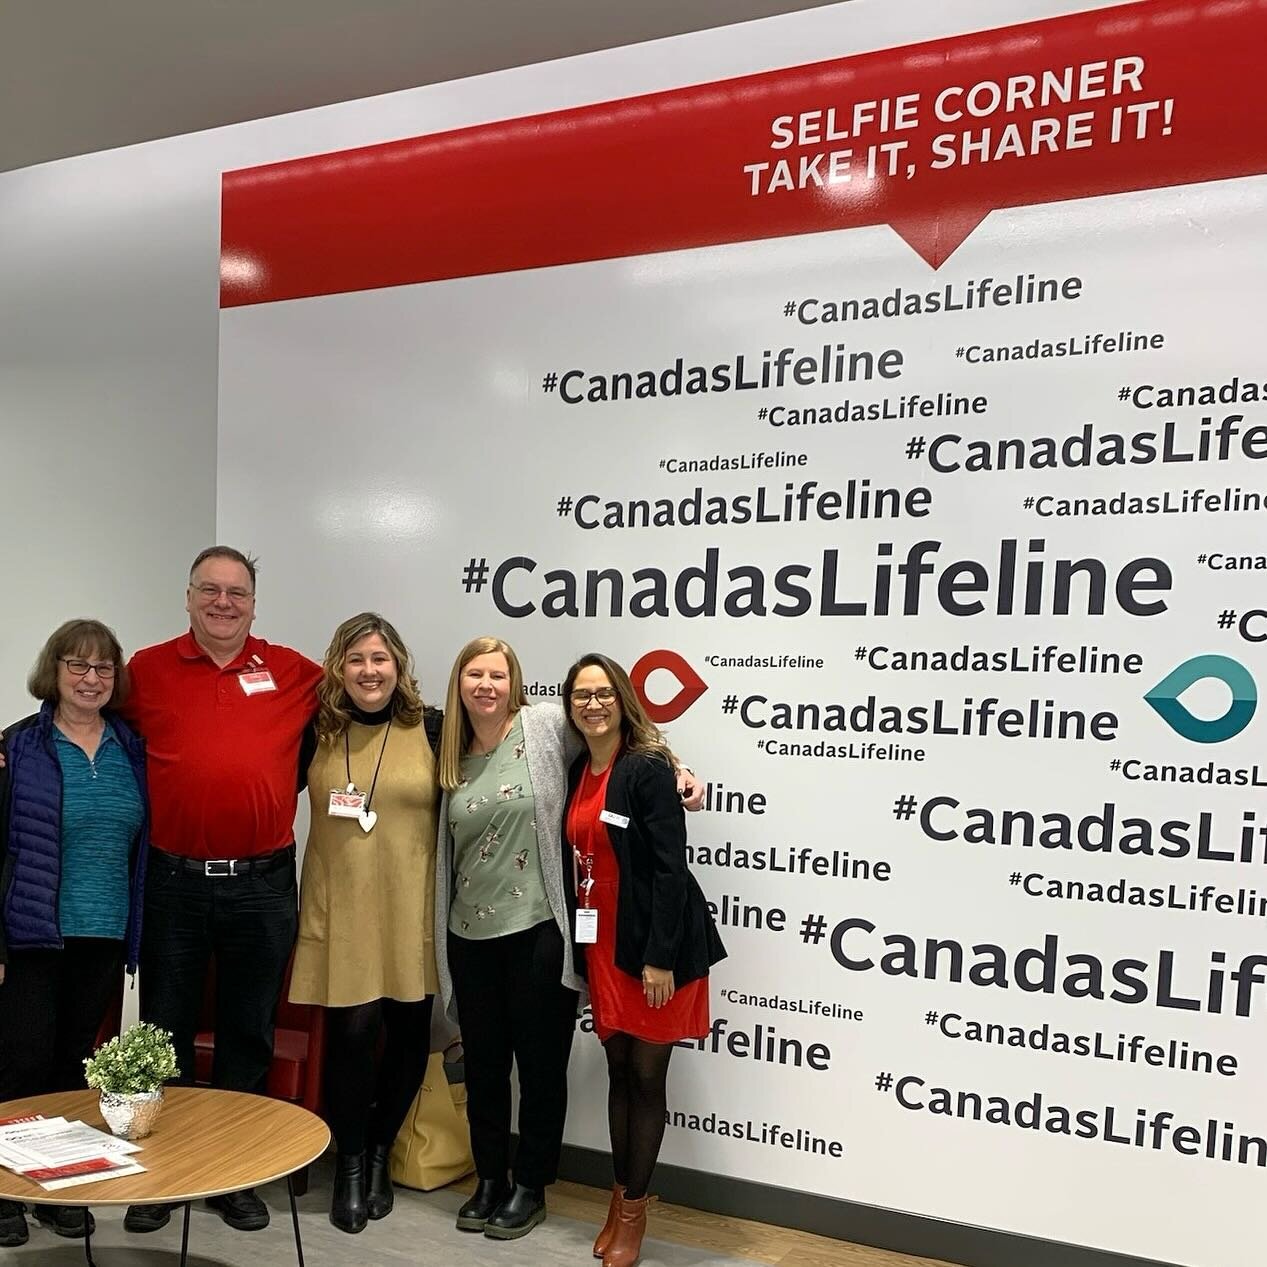 On the one year anniversary of the Abbotsford Plasma Donor Centre, it&rsquo;s safe to say our City has fully embraced @canadaslifeline at West Oaks Mall. 

🩸 9,417 units were donated this year (goal was 8,200) 🙌🏼
🩸 We collected the 4th largest am